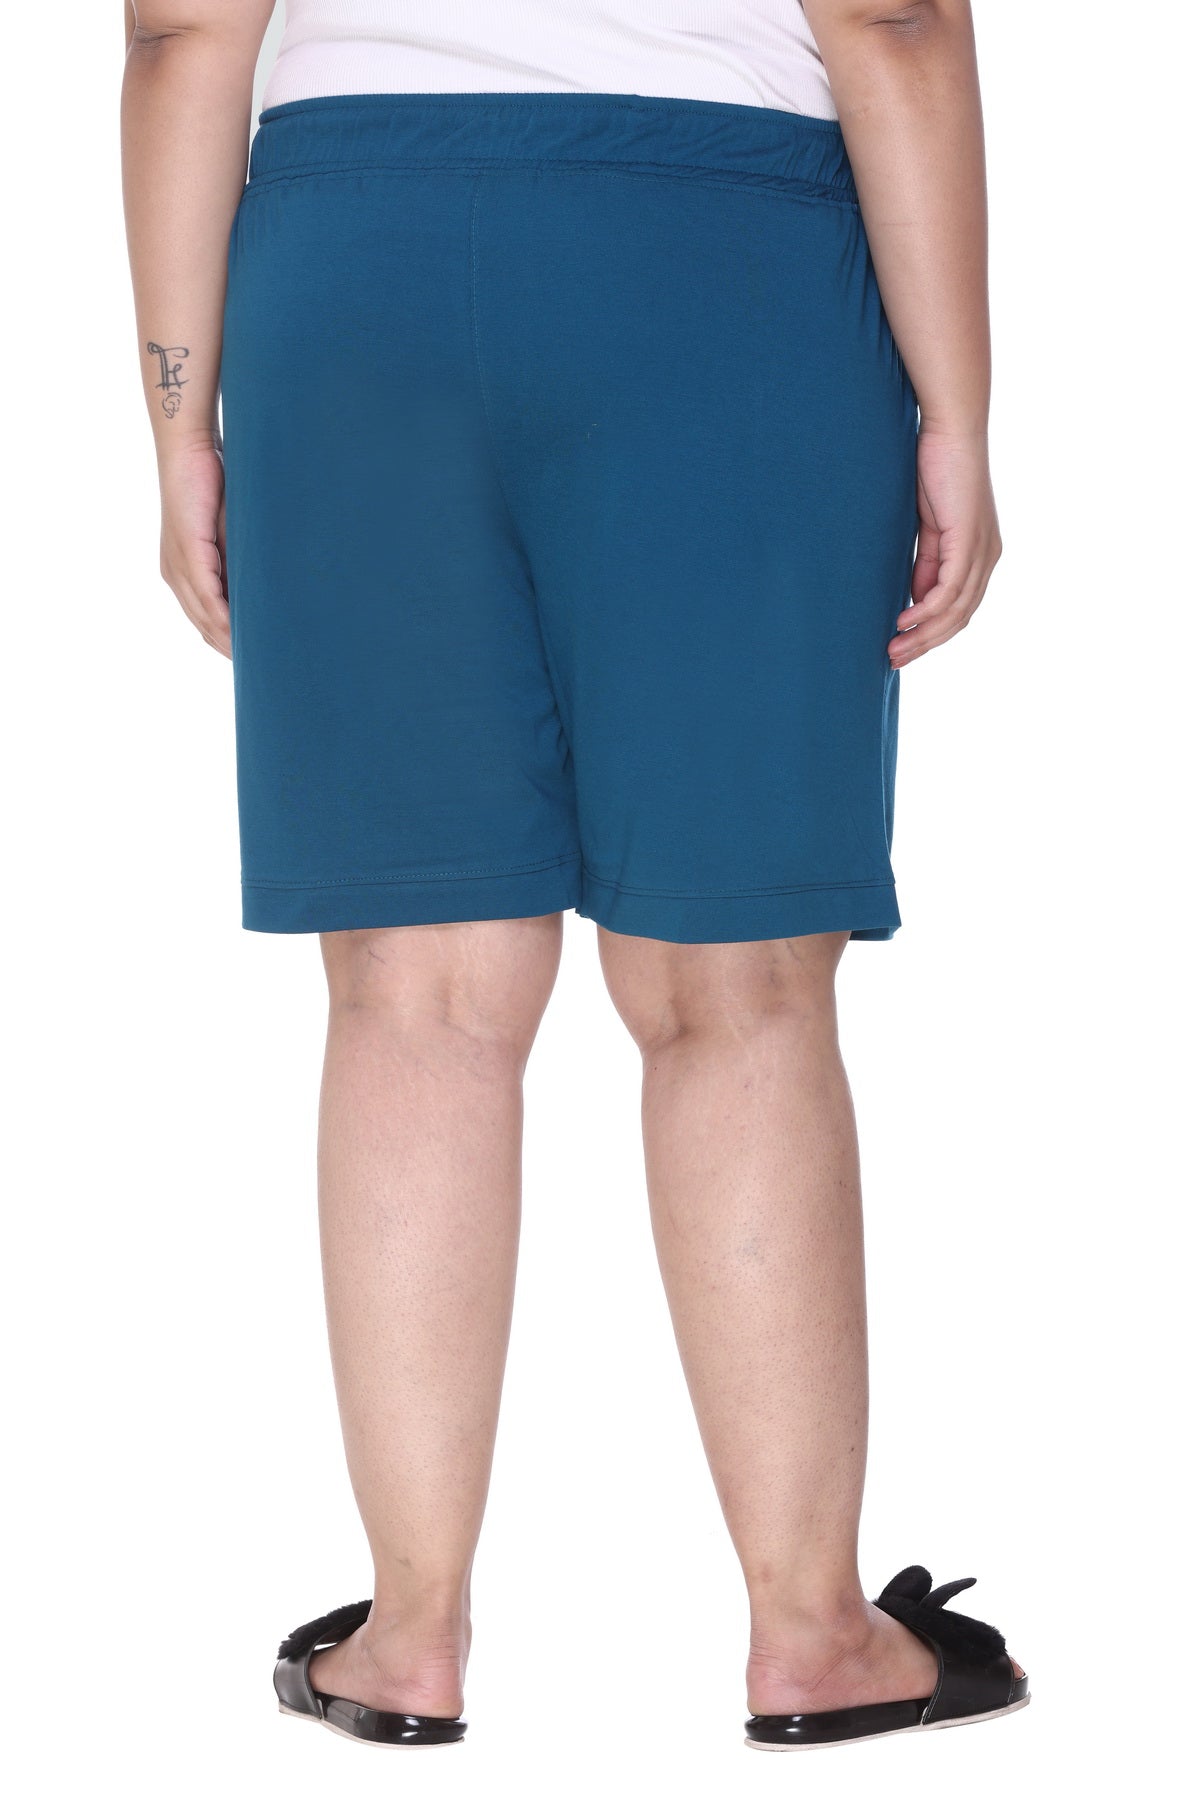 Comfortable Teal Blue Plain Bermuda Cotton Plus Size Shorts For Women Online In India